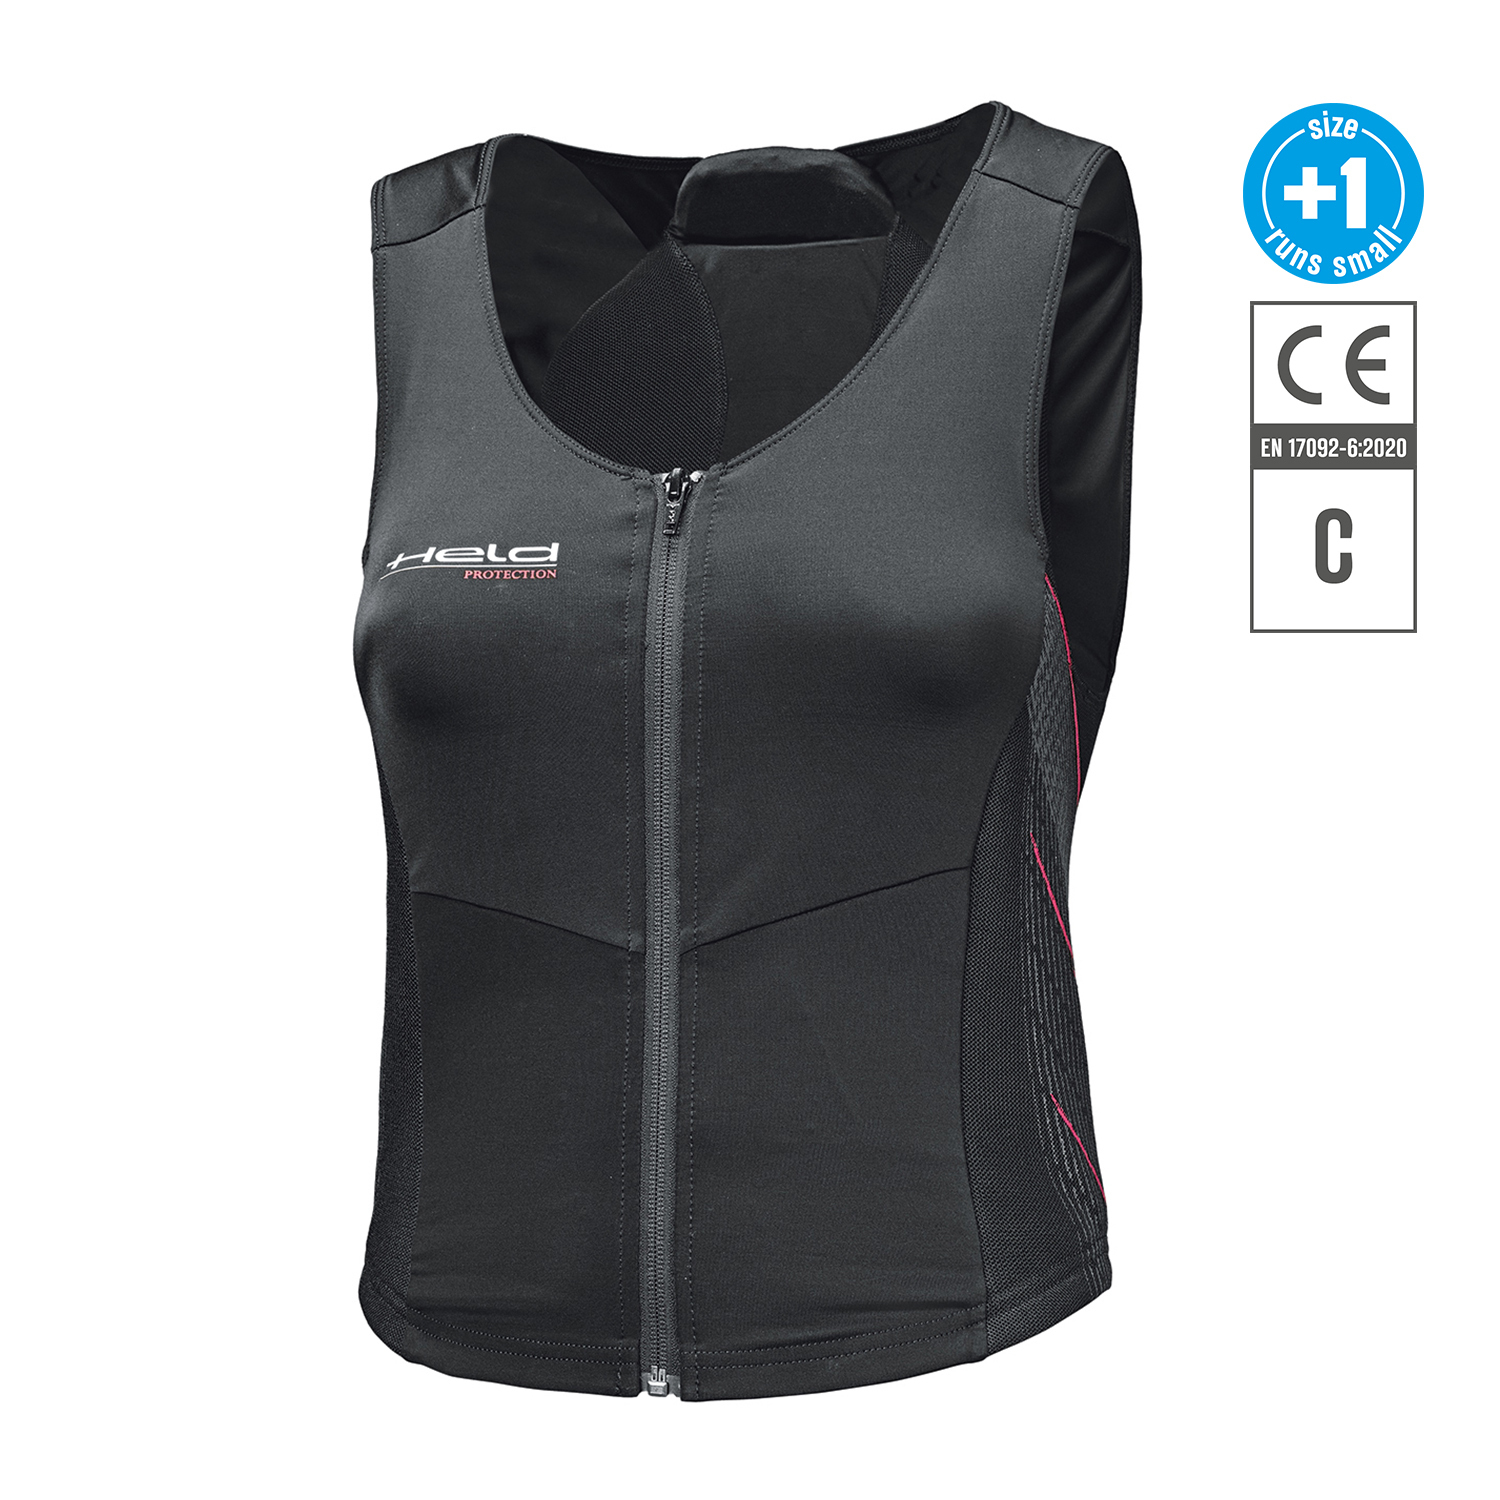 Held Nagato Vest Womens - Available in Various Sizes